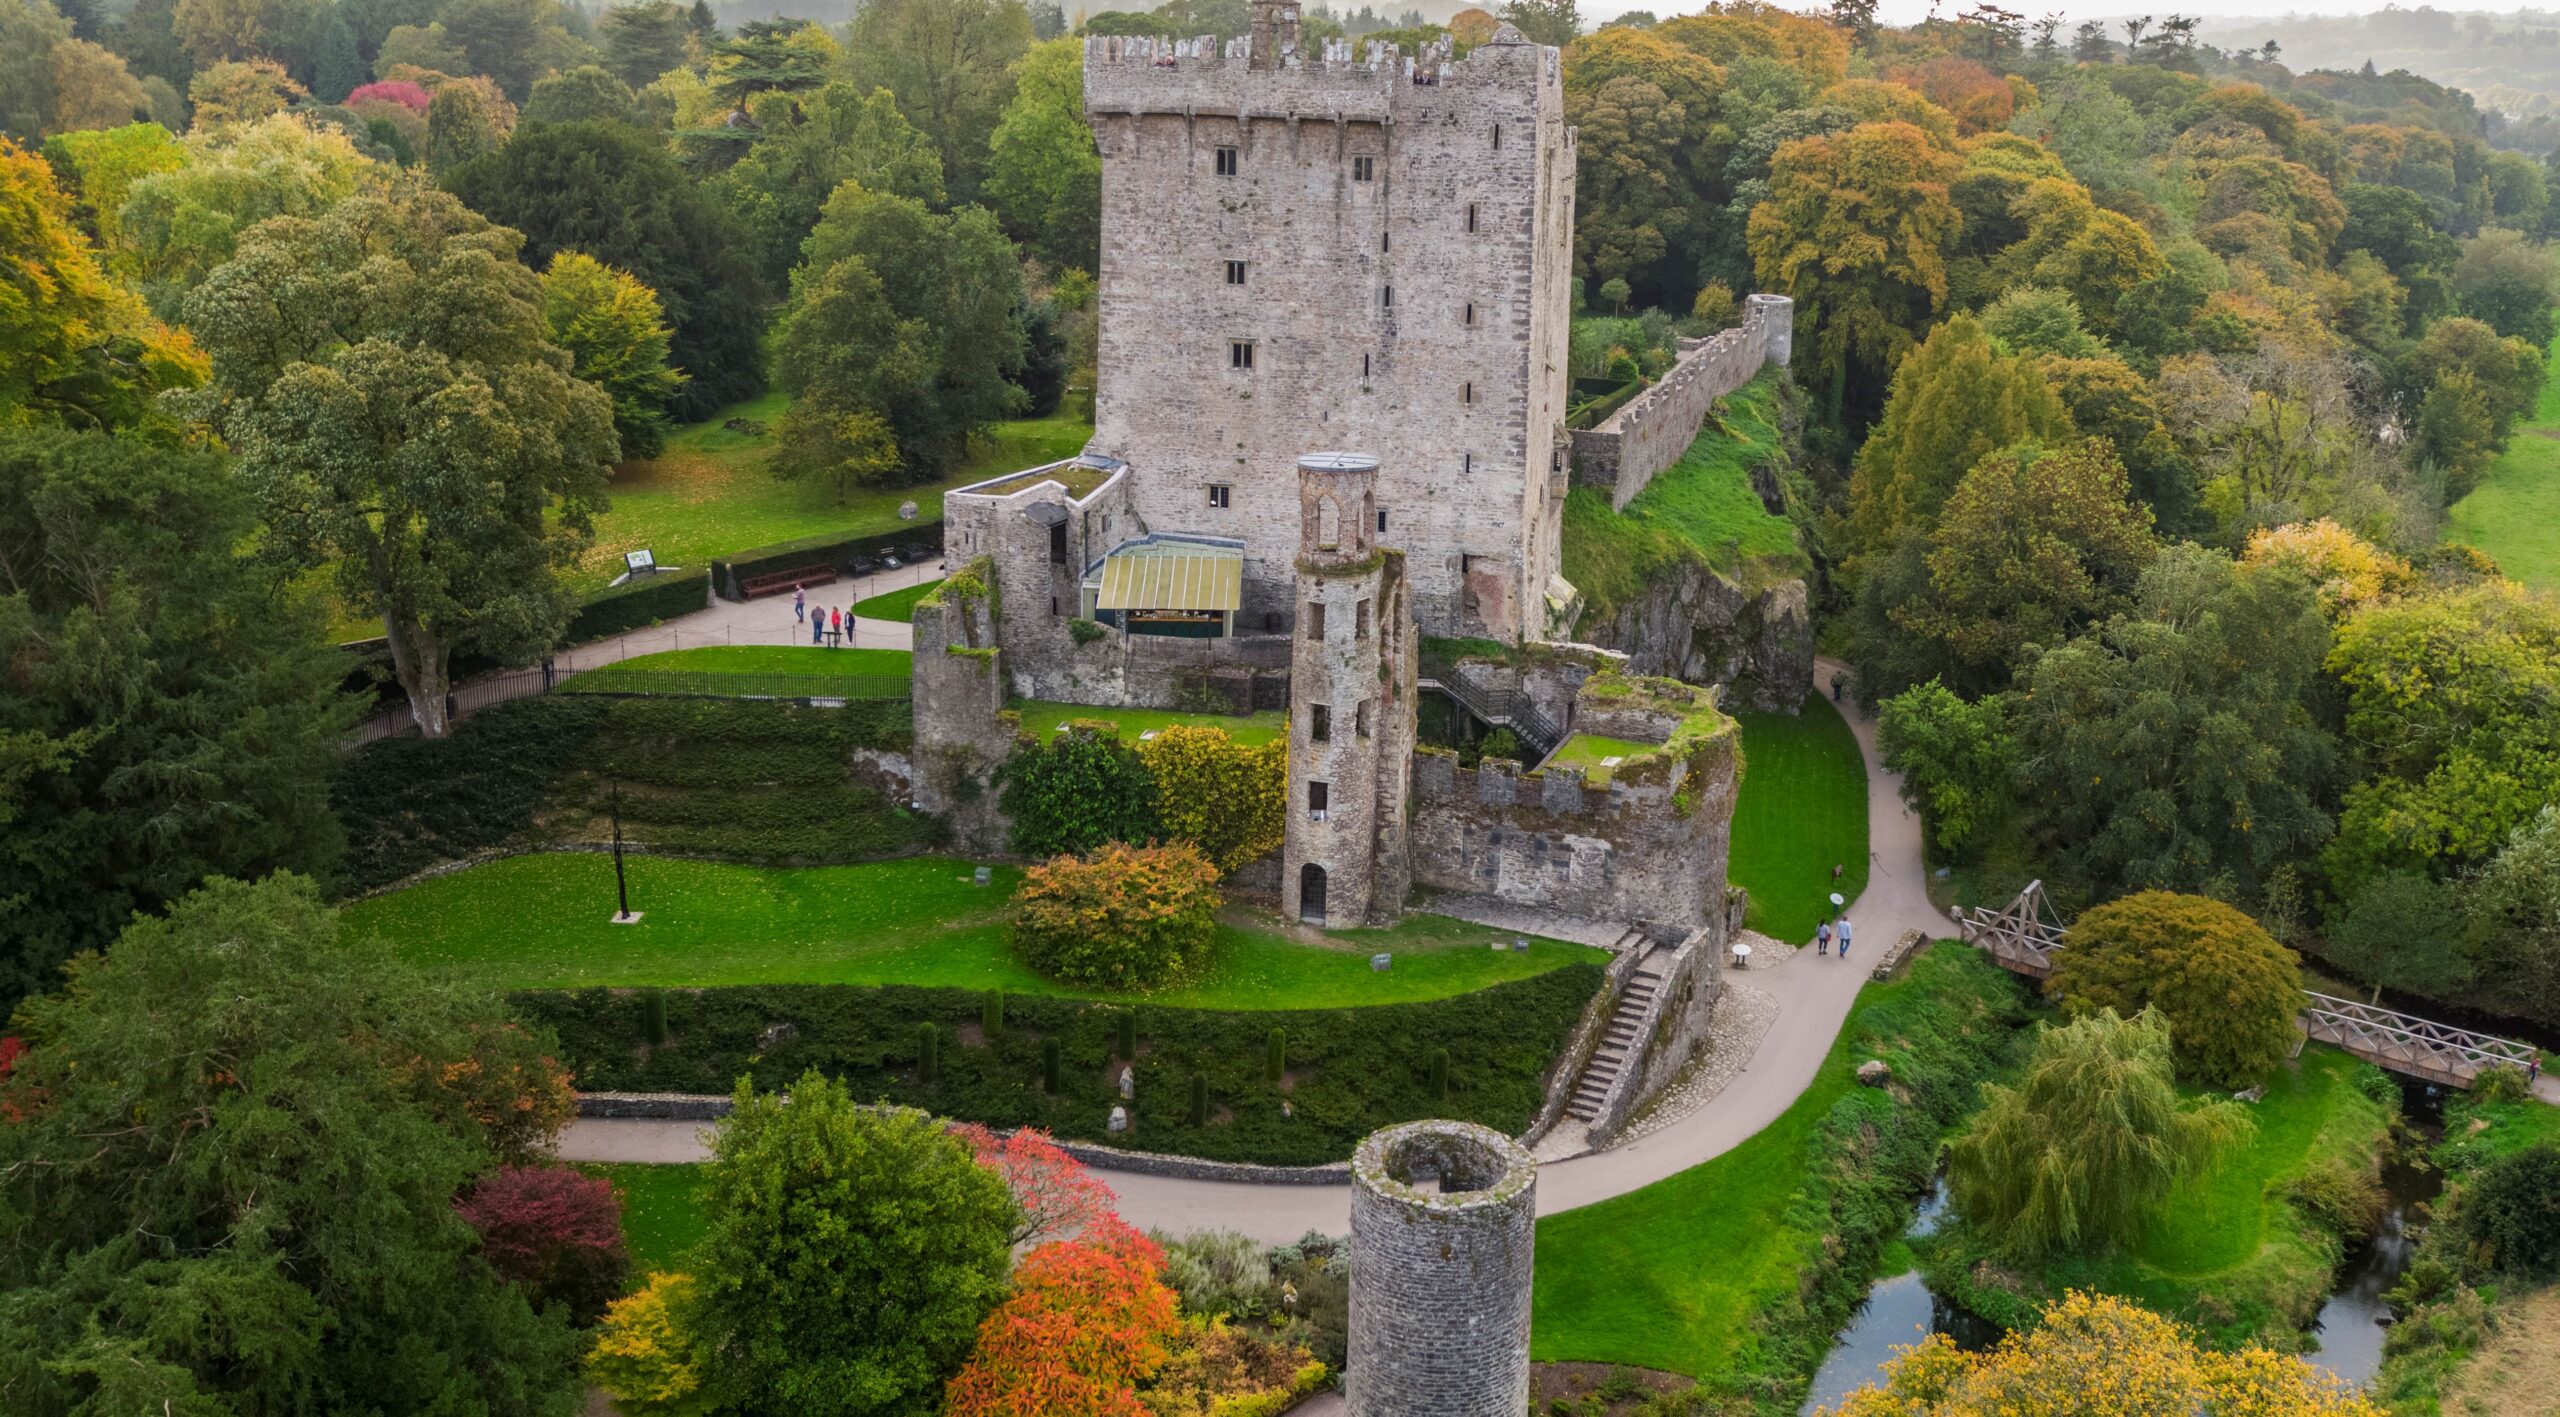 View of an autumn day, trees changing color and the view of Blarney Castle - Irish Roads to Cuisine and Culture - Brendan Vacations.